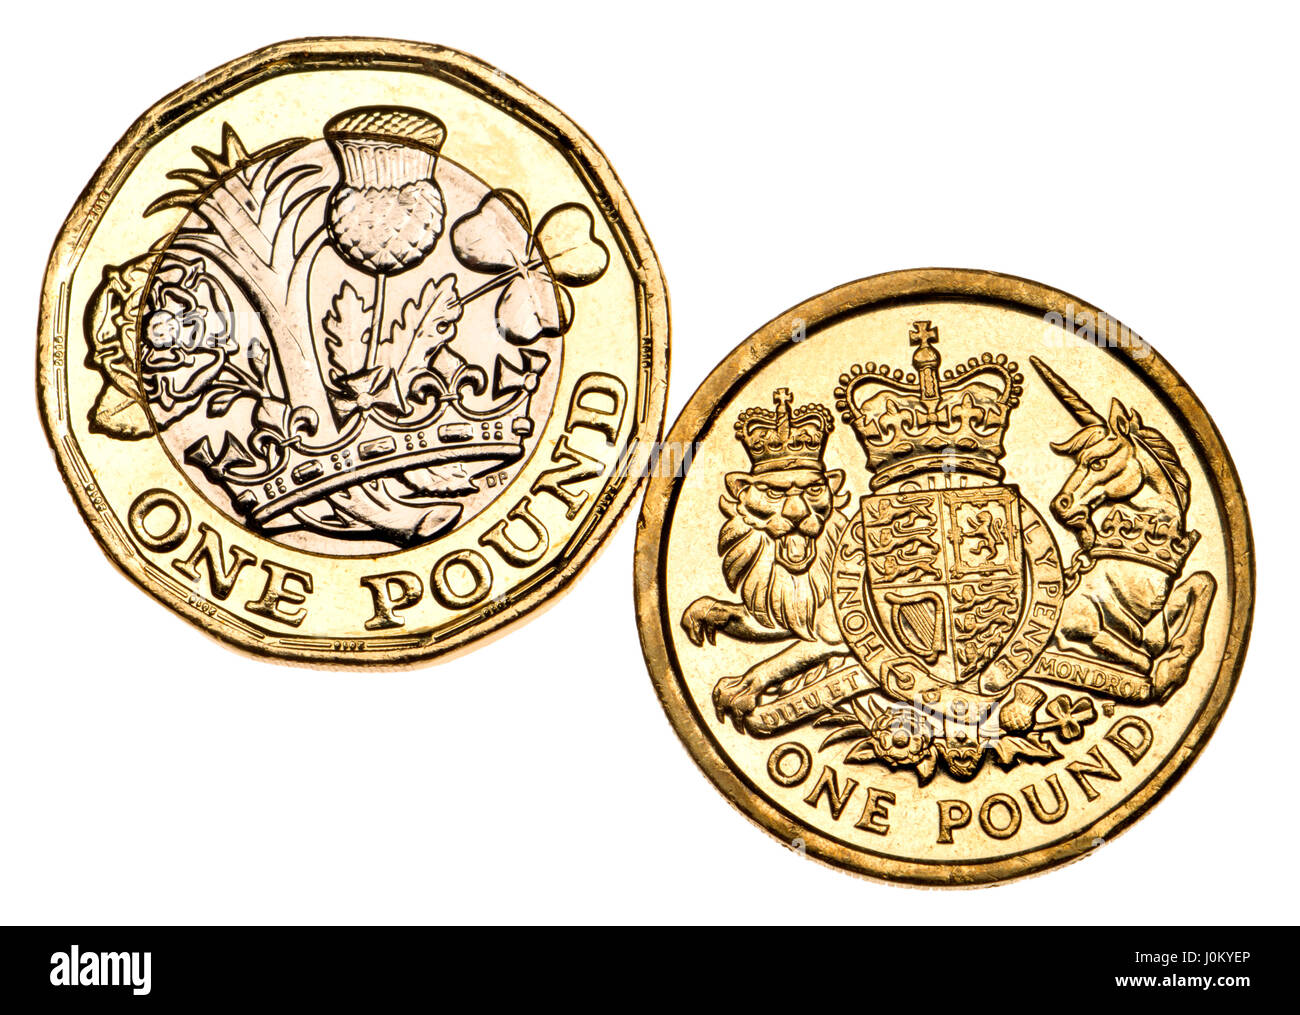 British pound coin - twelve-sided bimetallic 2017 release (dated 2016) and old design Stock Photo